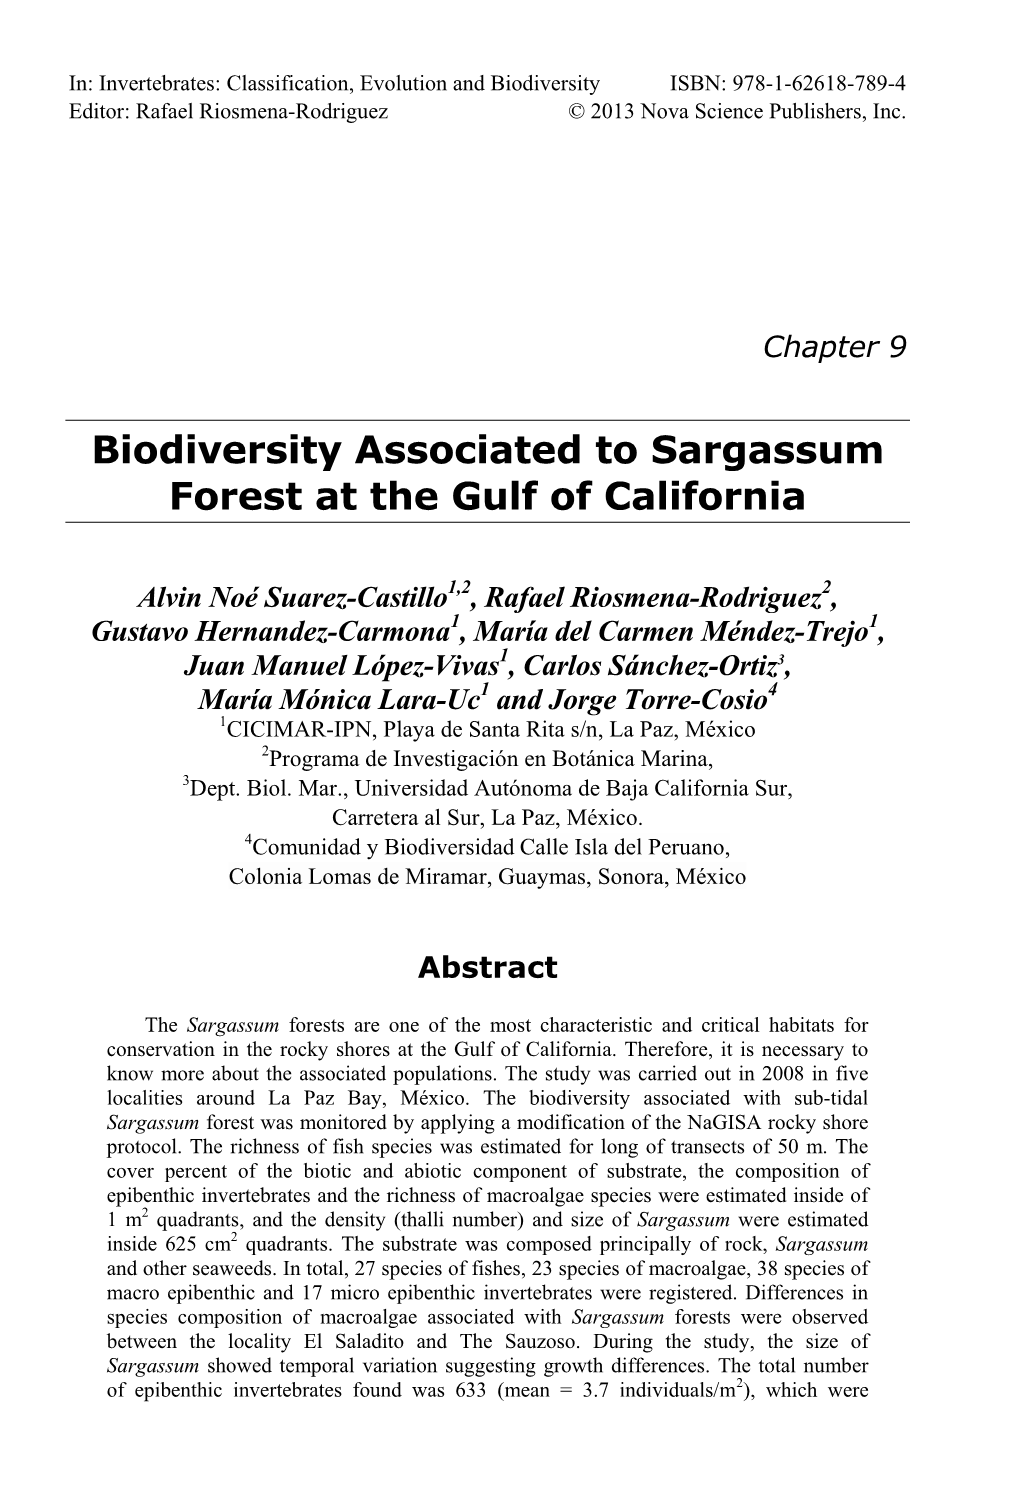 Biodiversity Associated to Sargassum Forest at the Gulf of California